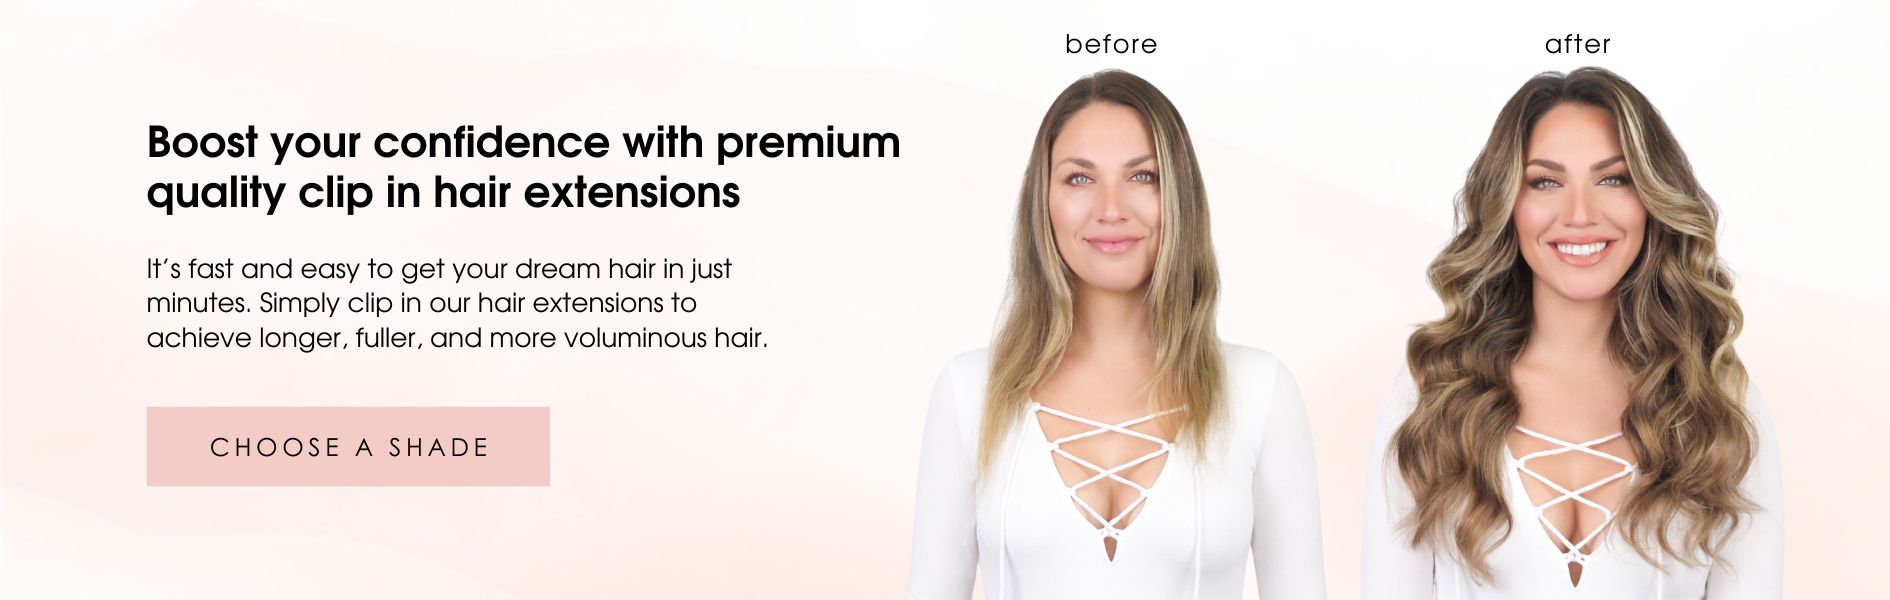 Boost your confidence with premium quality clip in hair extensions.  It’s fast and easy to get your dream hair in just minutes. Simply clip in our hair extensions to achieve longer, fuller, and more voluminous hair. 